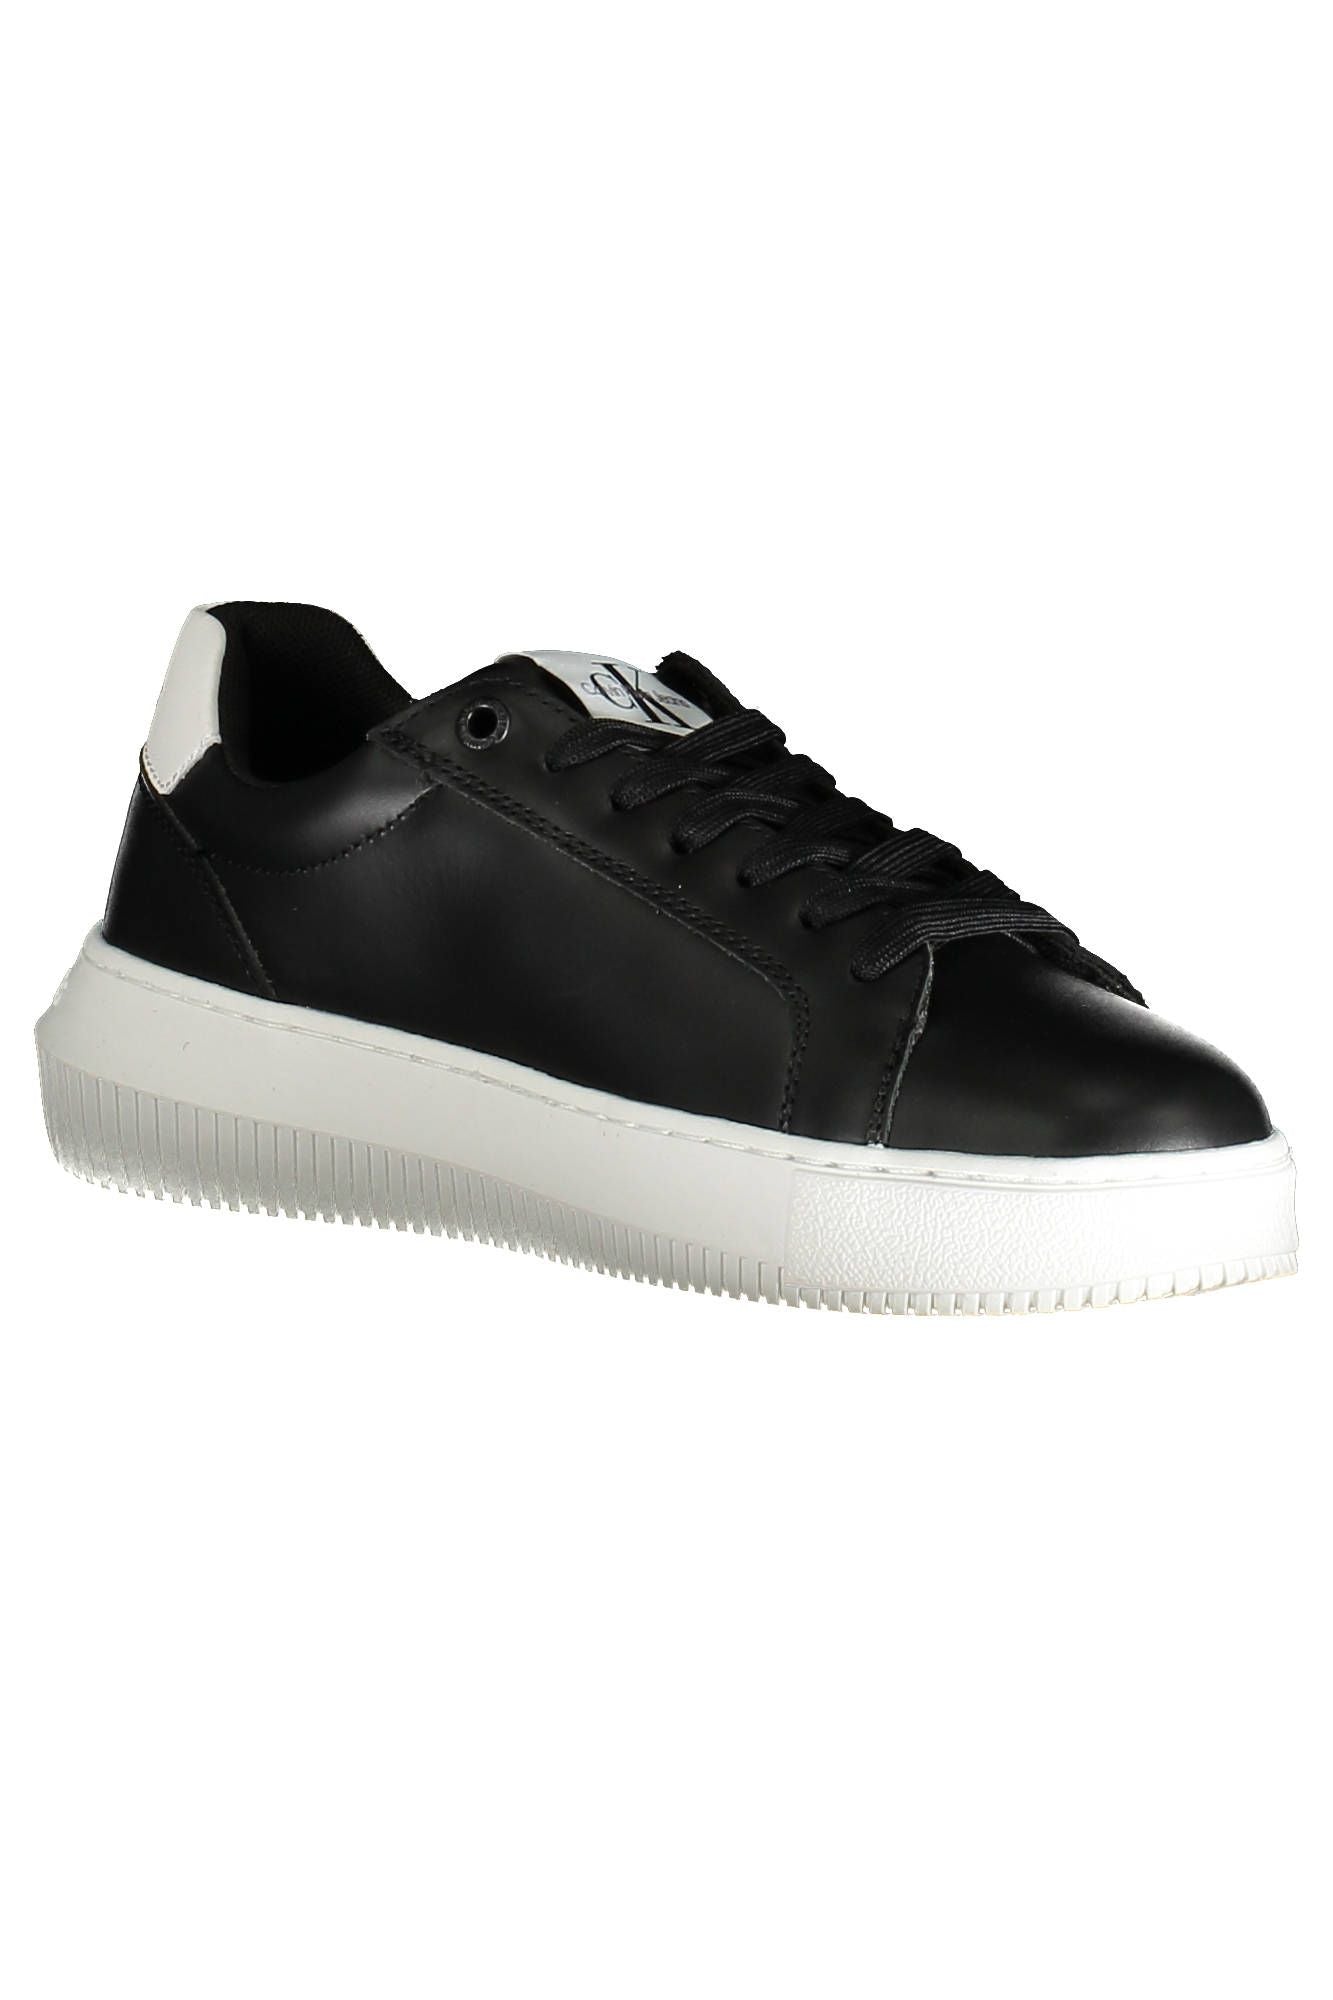 Calvin Klein Chic Contrasting Lace-Up Sporty Sneakers